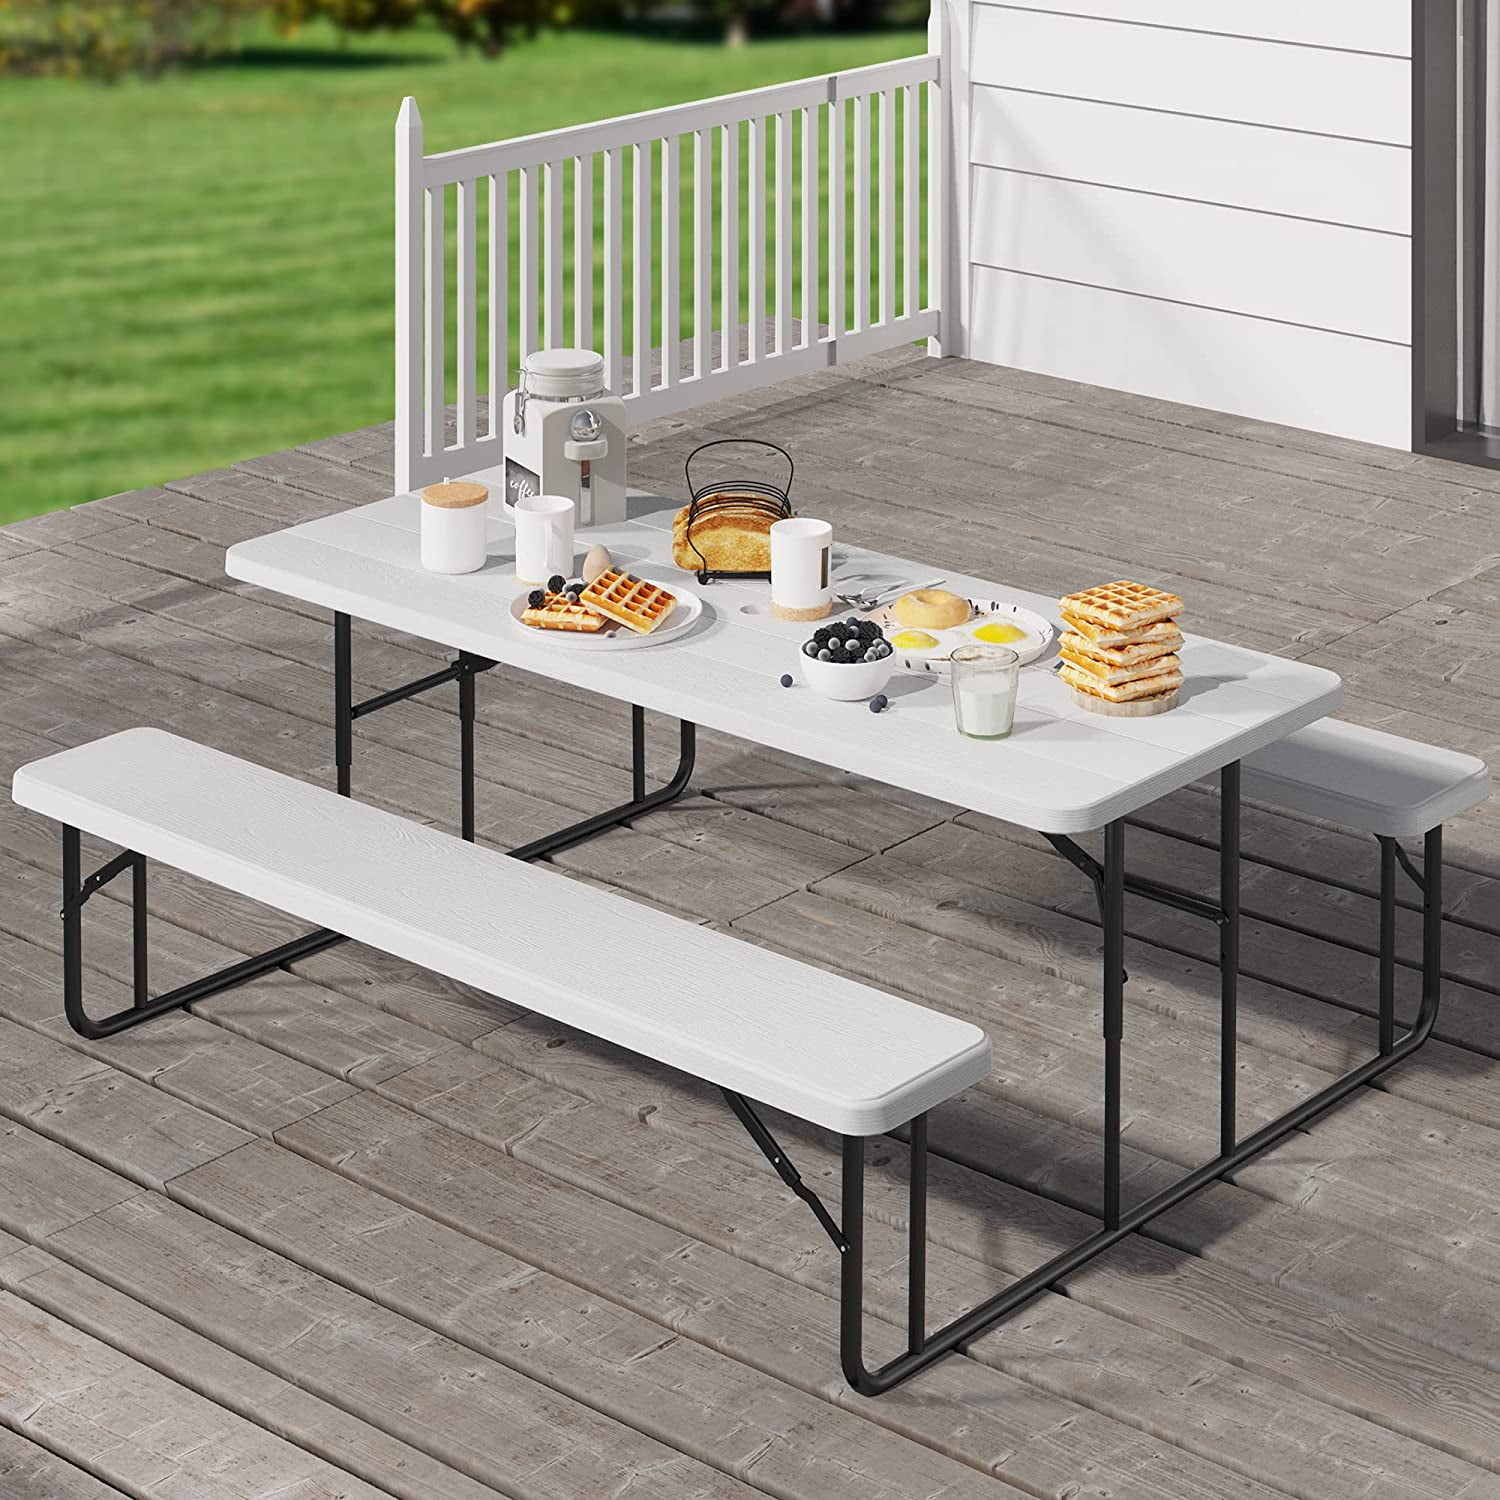 Draw public Arbitrage YITAHOME 6ft Folding Picnic Table Heavy Duty Outdoor Picnic Table and Bench  Resin Tabletop & Stable Steel Frame w/Umbrella Hole for Yard Patio Lawn  Party White - Walmart.com